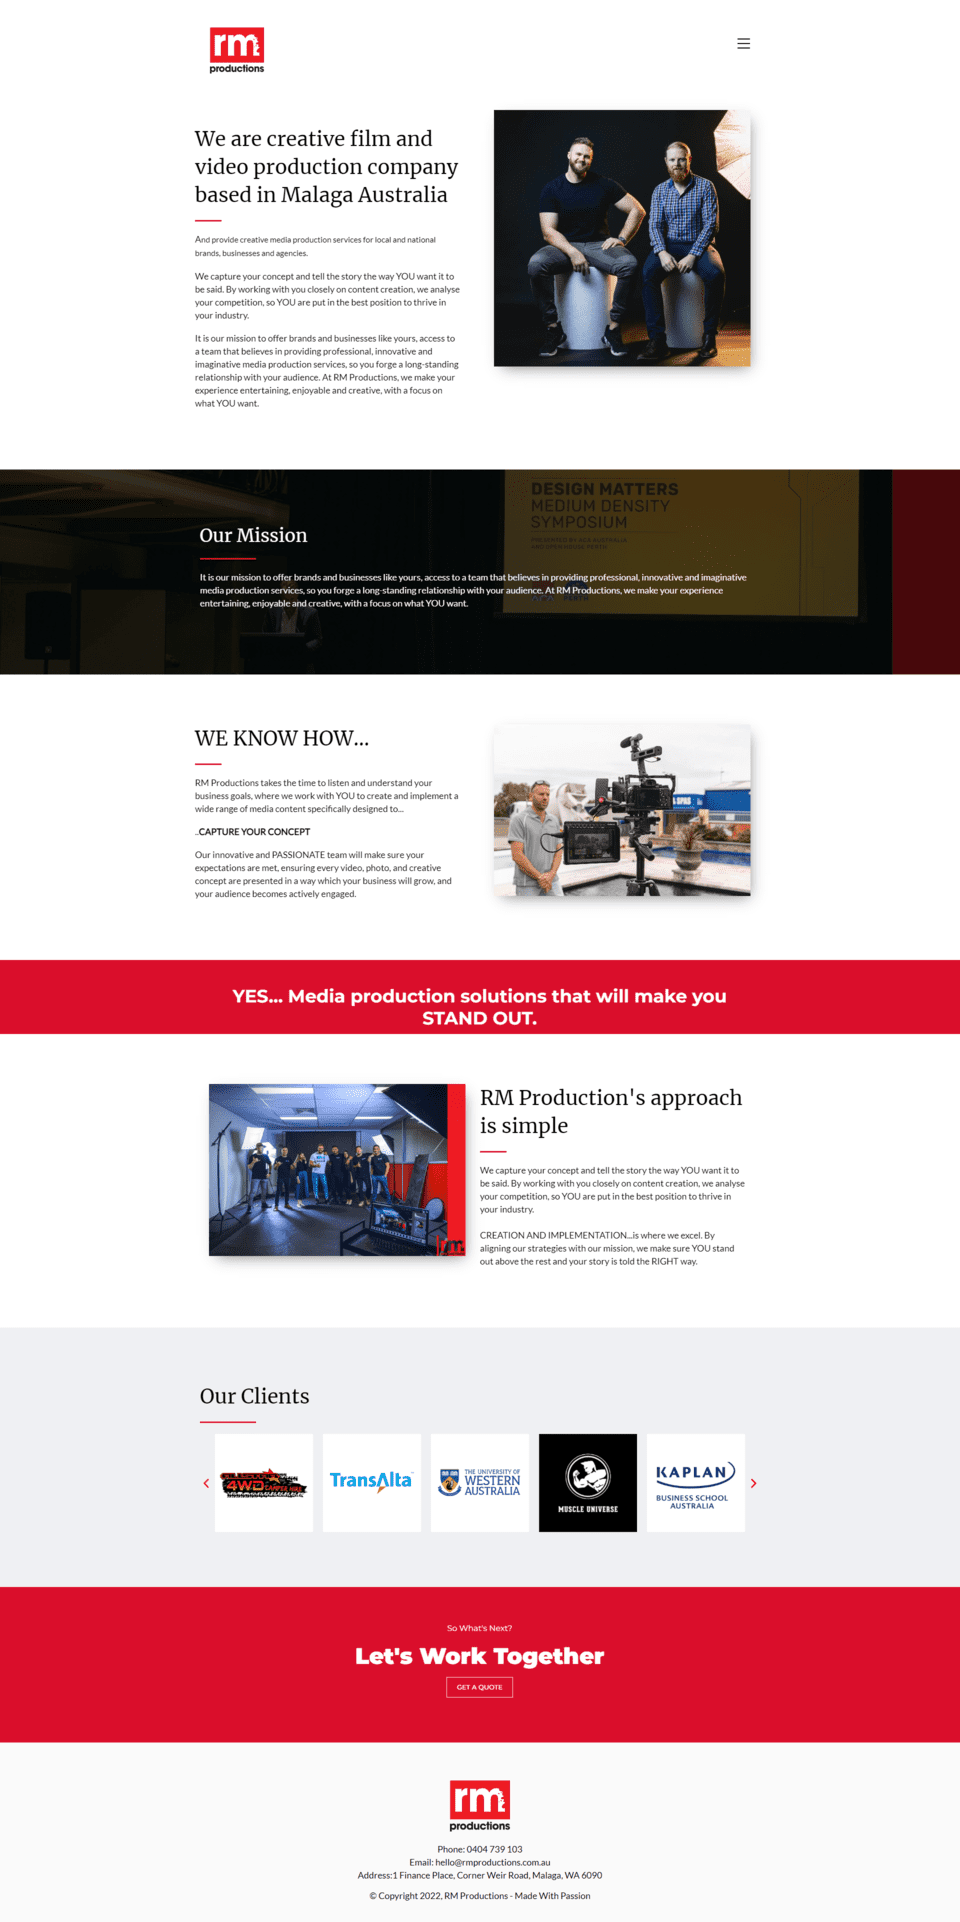 About us page of RM production website